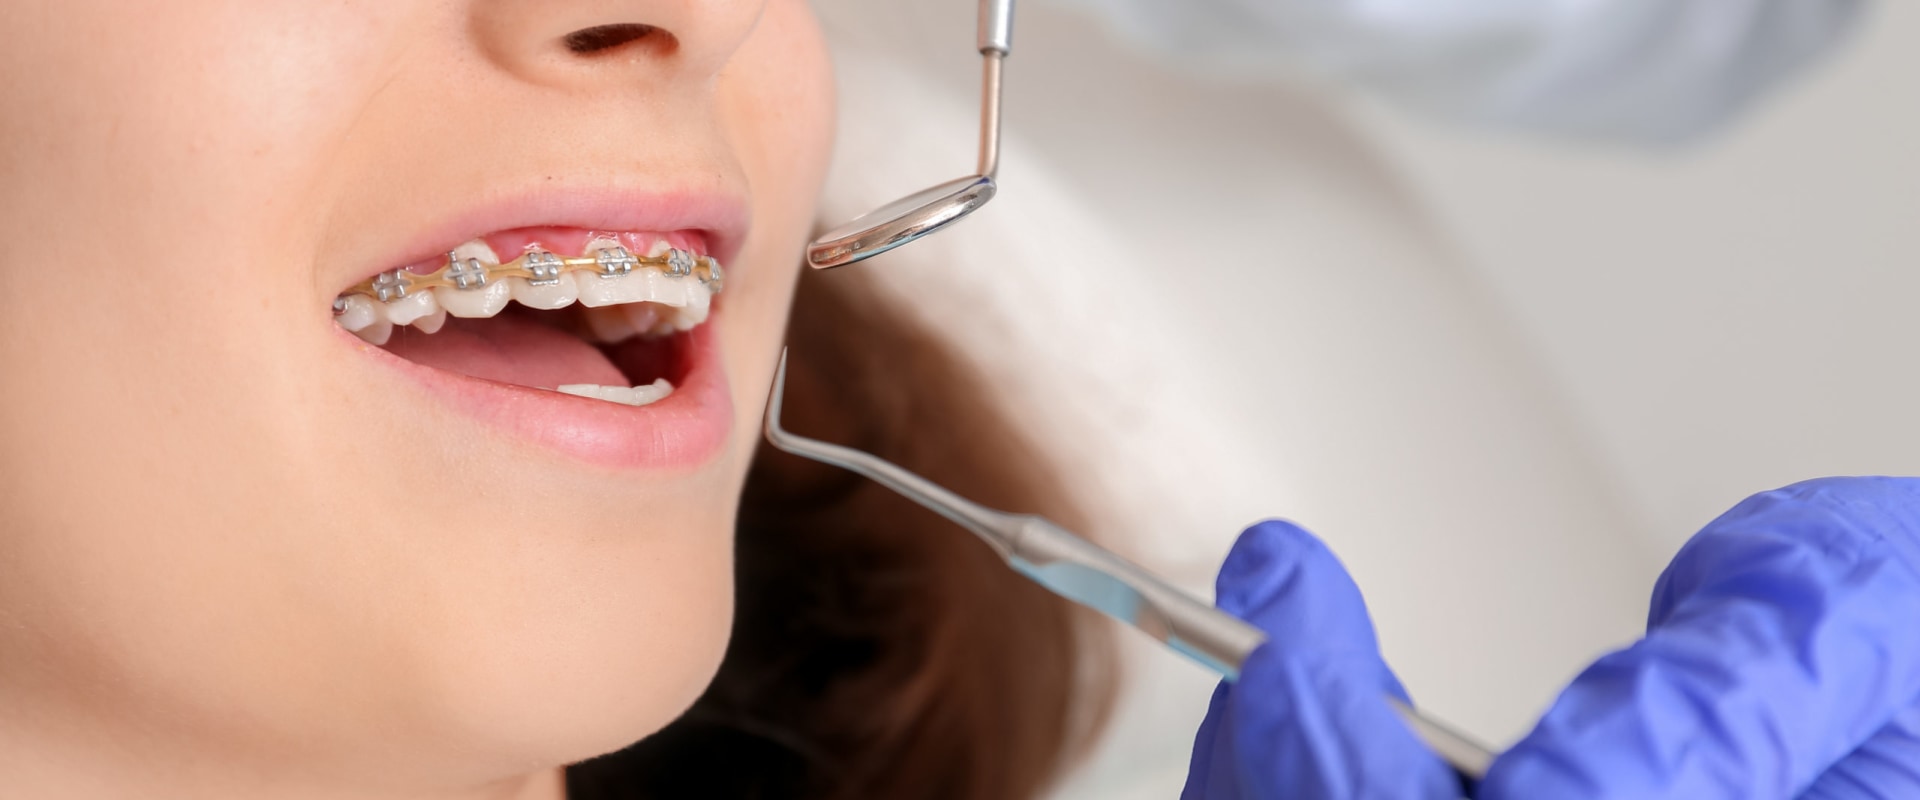 How to Avoid Cavities During Orthodontic Treatment